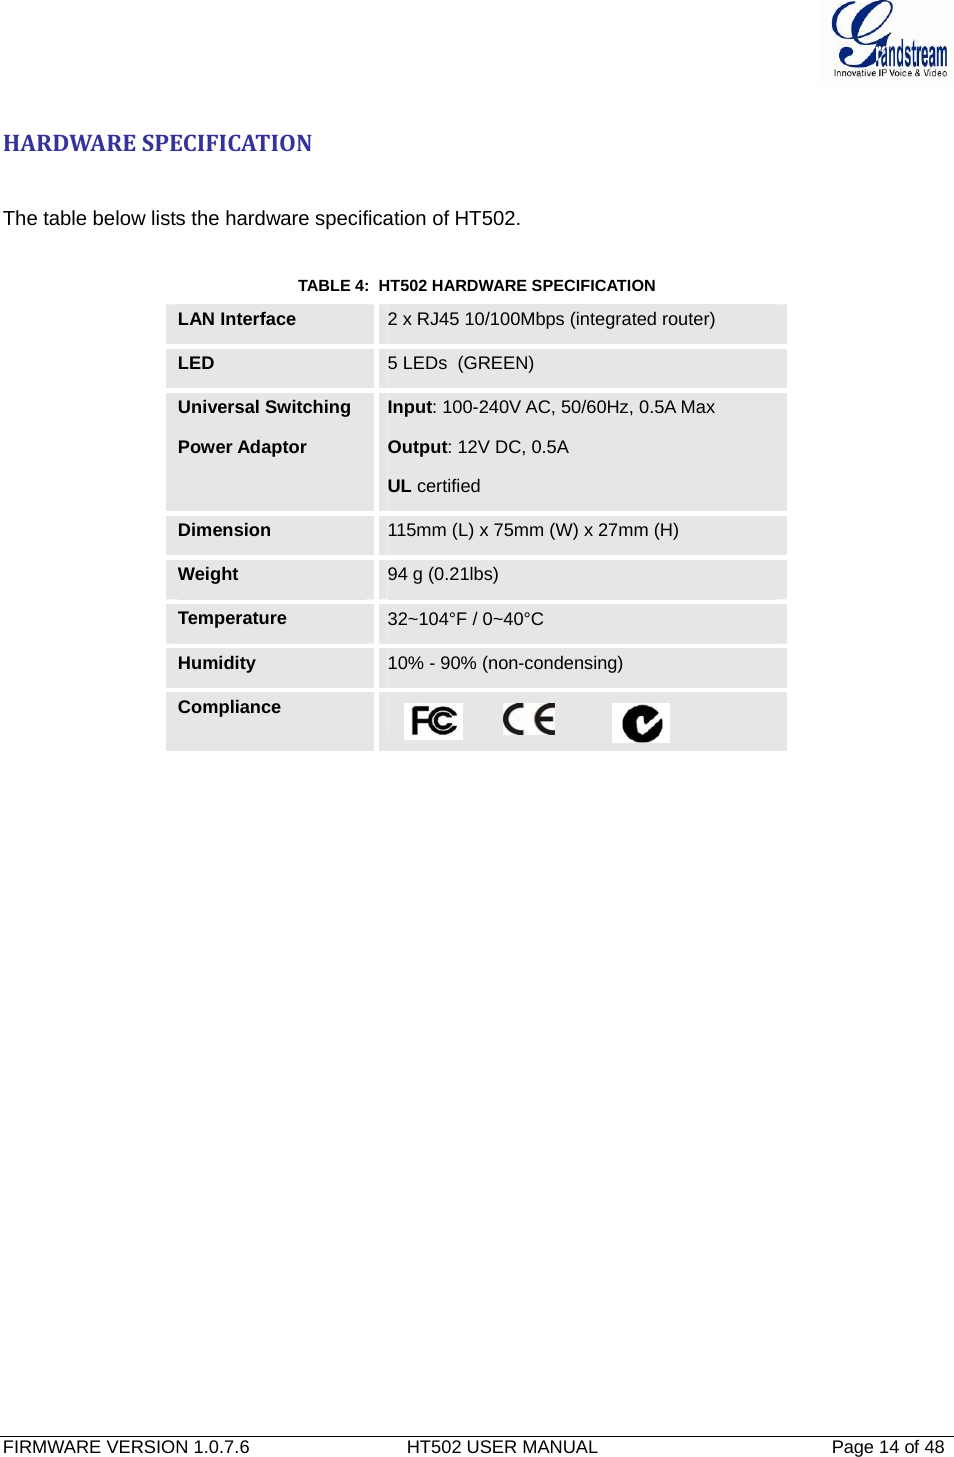  FIRMWARE VERSION 1.0.7.6                               HT502 USER MANUAL                                              Page 14 of 48   HARDWARESPECIFICATION  The table below lists the hardware specification of HT502.   TABLE 4:  HT502 HARDWARE SPECIFICATION LAN Interface  2 x RJ45 10/100Mbps (integrated router) LED  5 LEDs  (GREEN) Universal Switching Power Adaptor Input: 100-240V AC, 50/60Hz, 0.5A Max Output: 12V DC, 0.5A UL certified  Dimension  115mm (L) x 75mm (W) x 27mm (H) Weight  94 g (0.21lbs) Temperature  32~104°F / 0~40°C Humidity  10% - 90% (non-condensing) Compliance                  